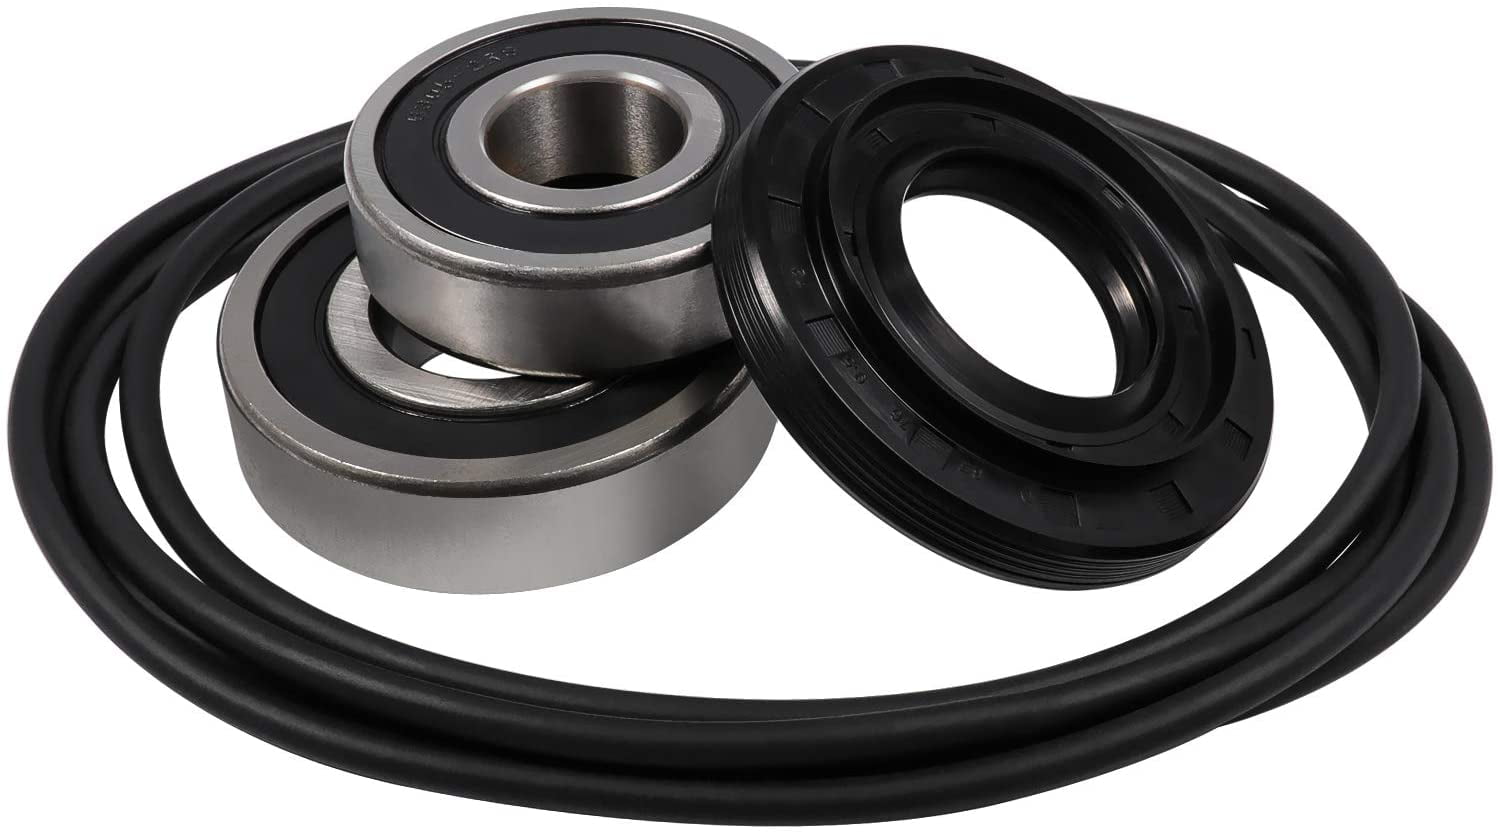 First4spares Drum Bearings and Seal Kit for LG Washing Machines